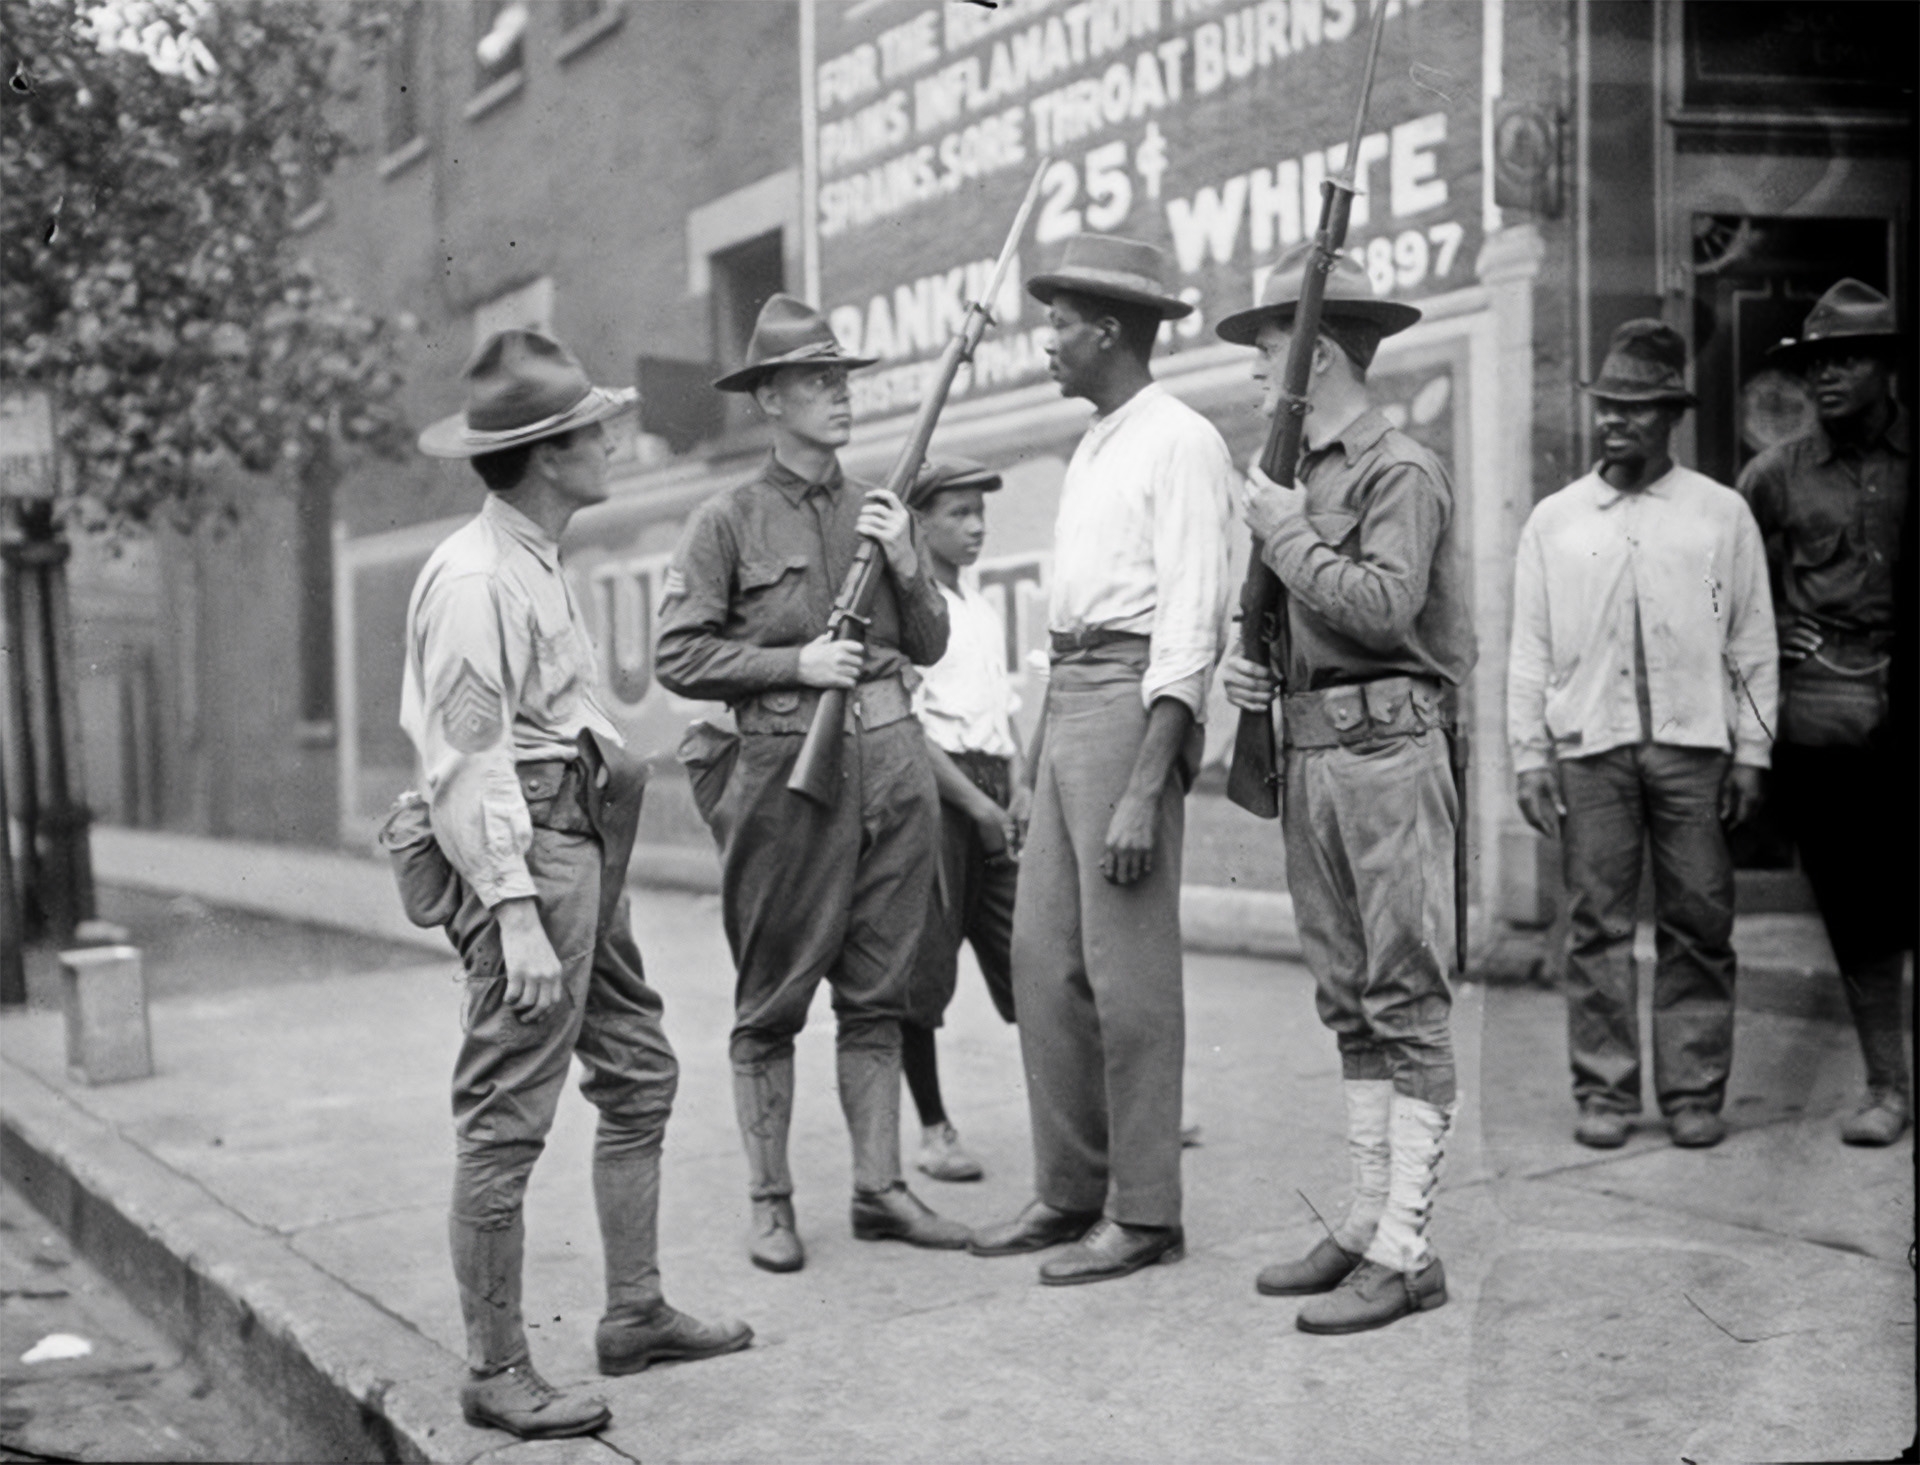 A Black man stands in the middle of National Guard soldiers in Chicago during the 1919 Chicago Race Riot.